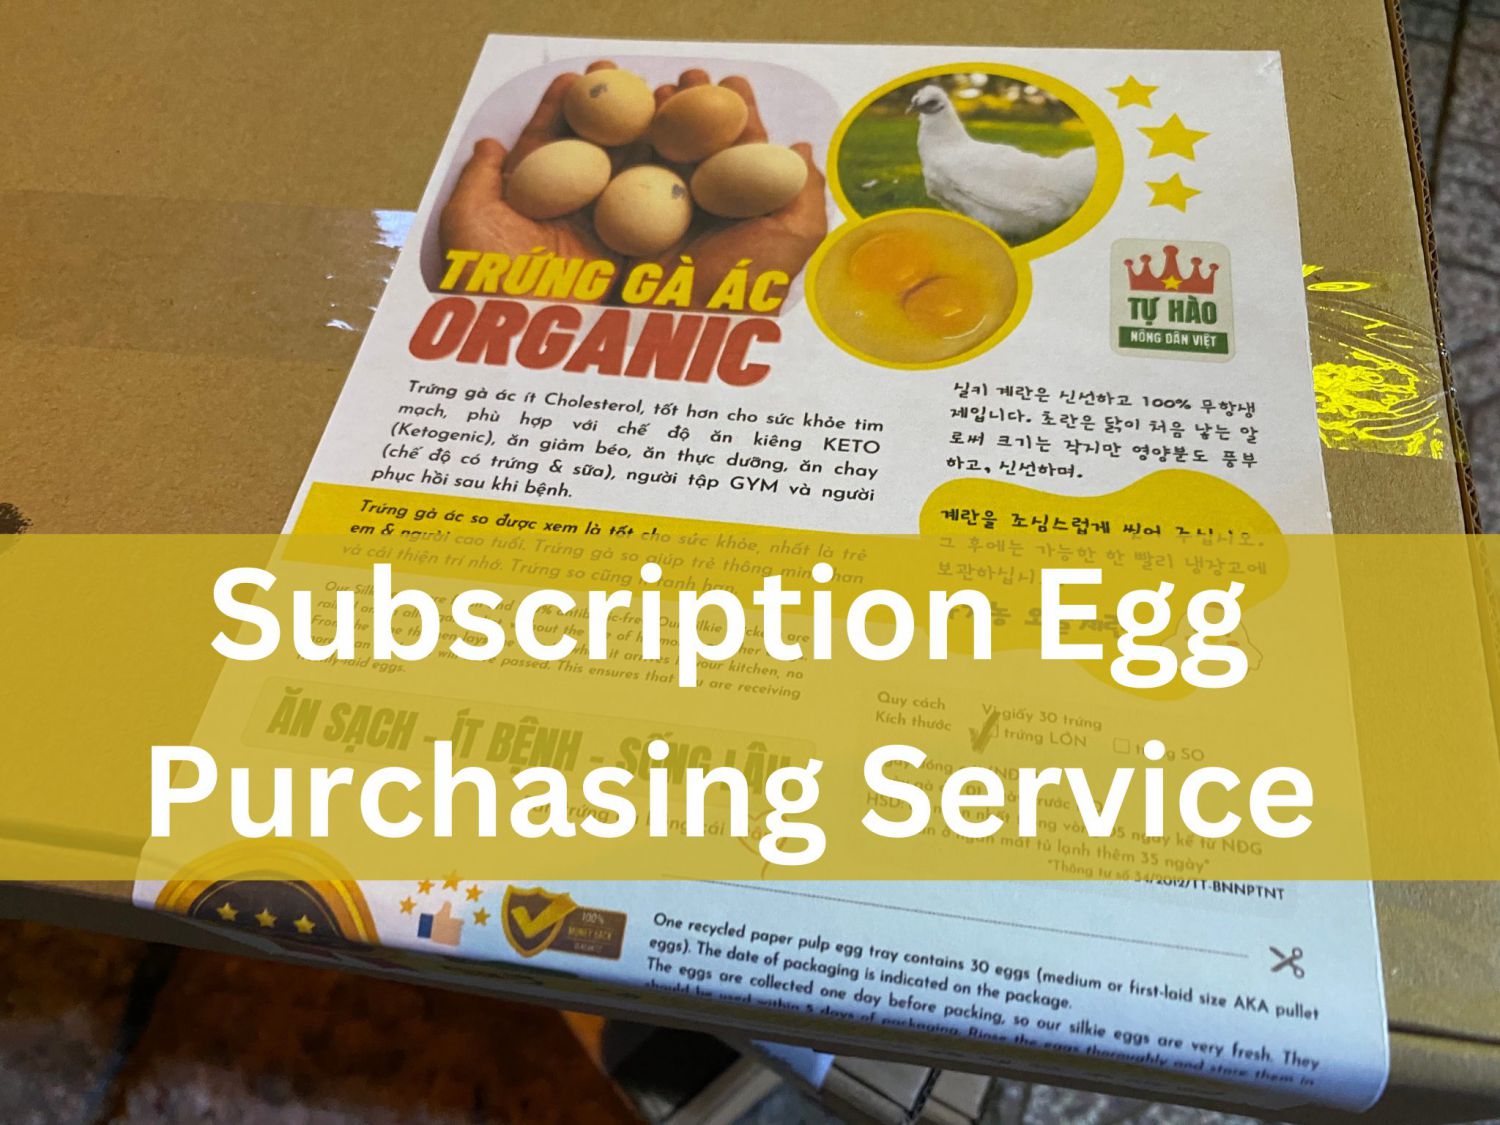 Get Fresh, Nutritious Eggs Delivered Right to Your Door with Our Subscription Egg Purchasing Service